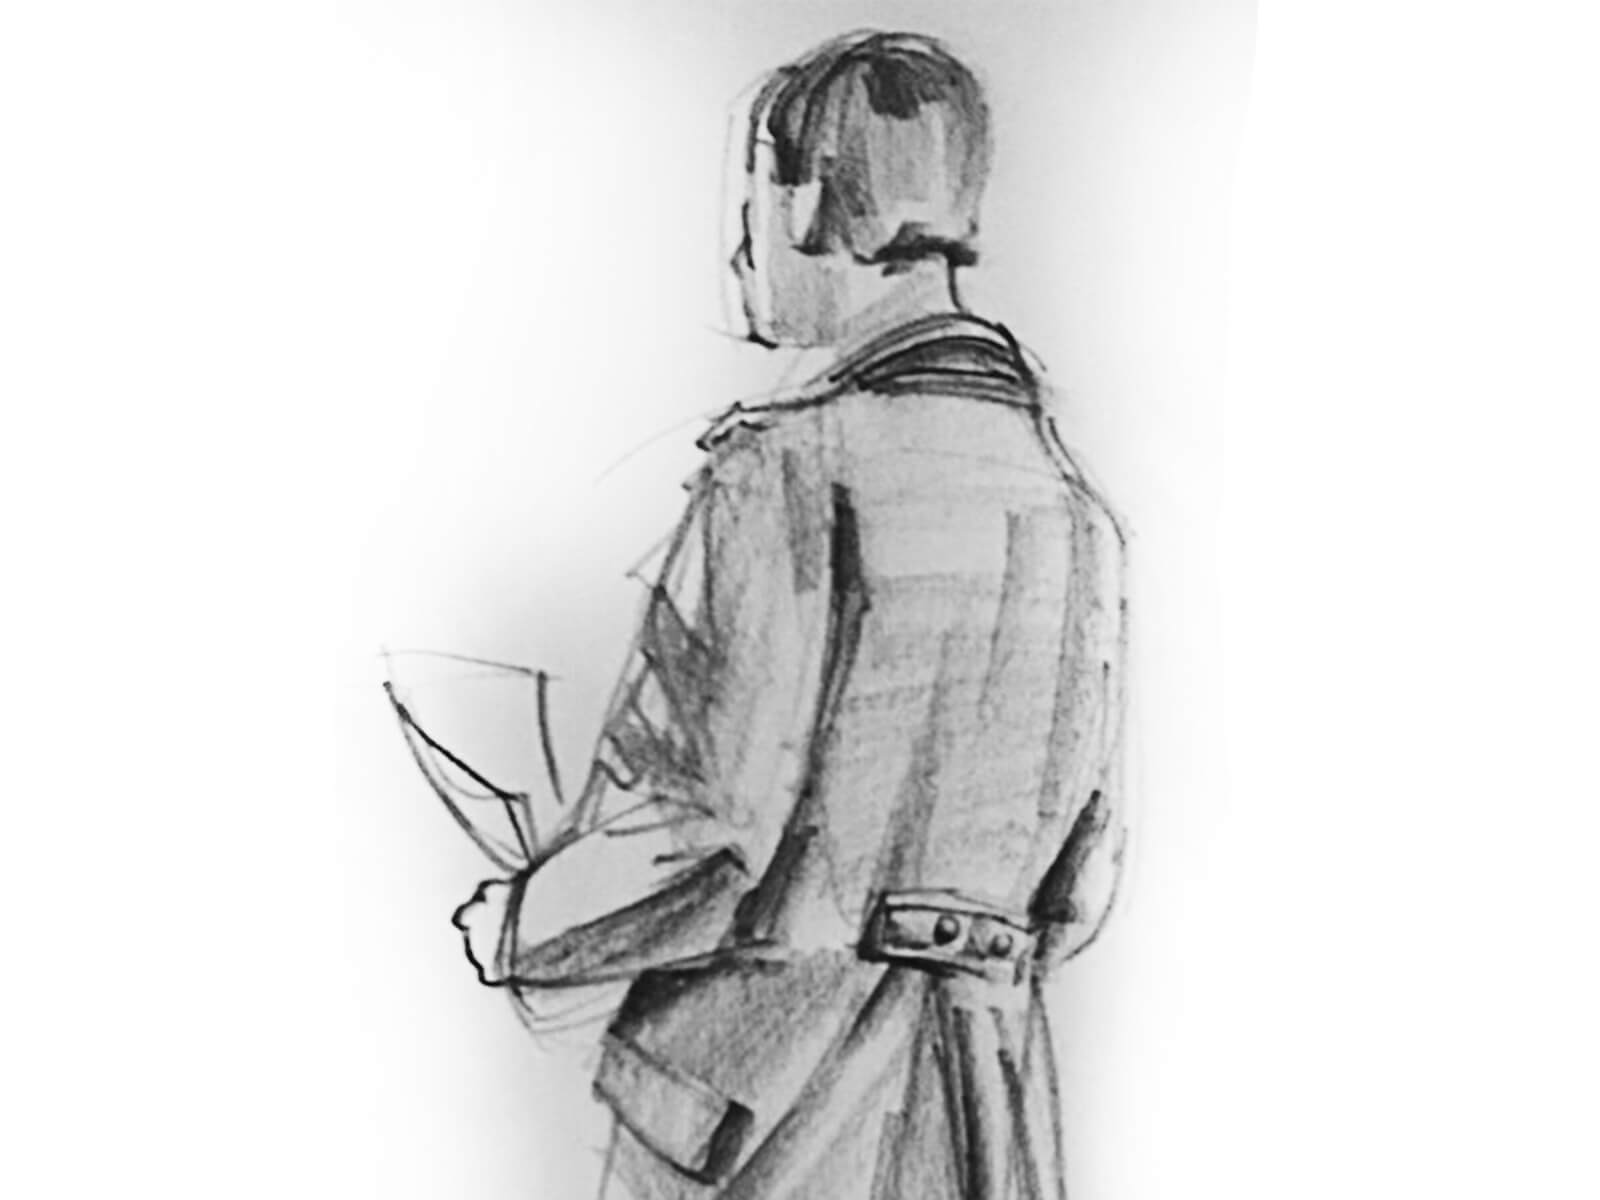 A sketch of a man in a raincoat with his back to the artist